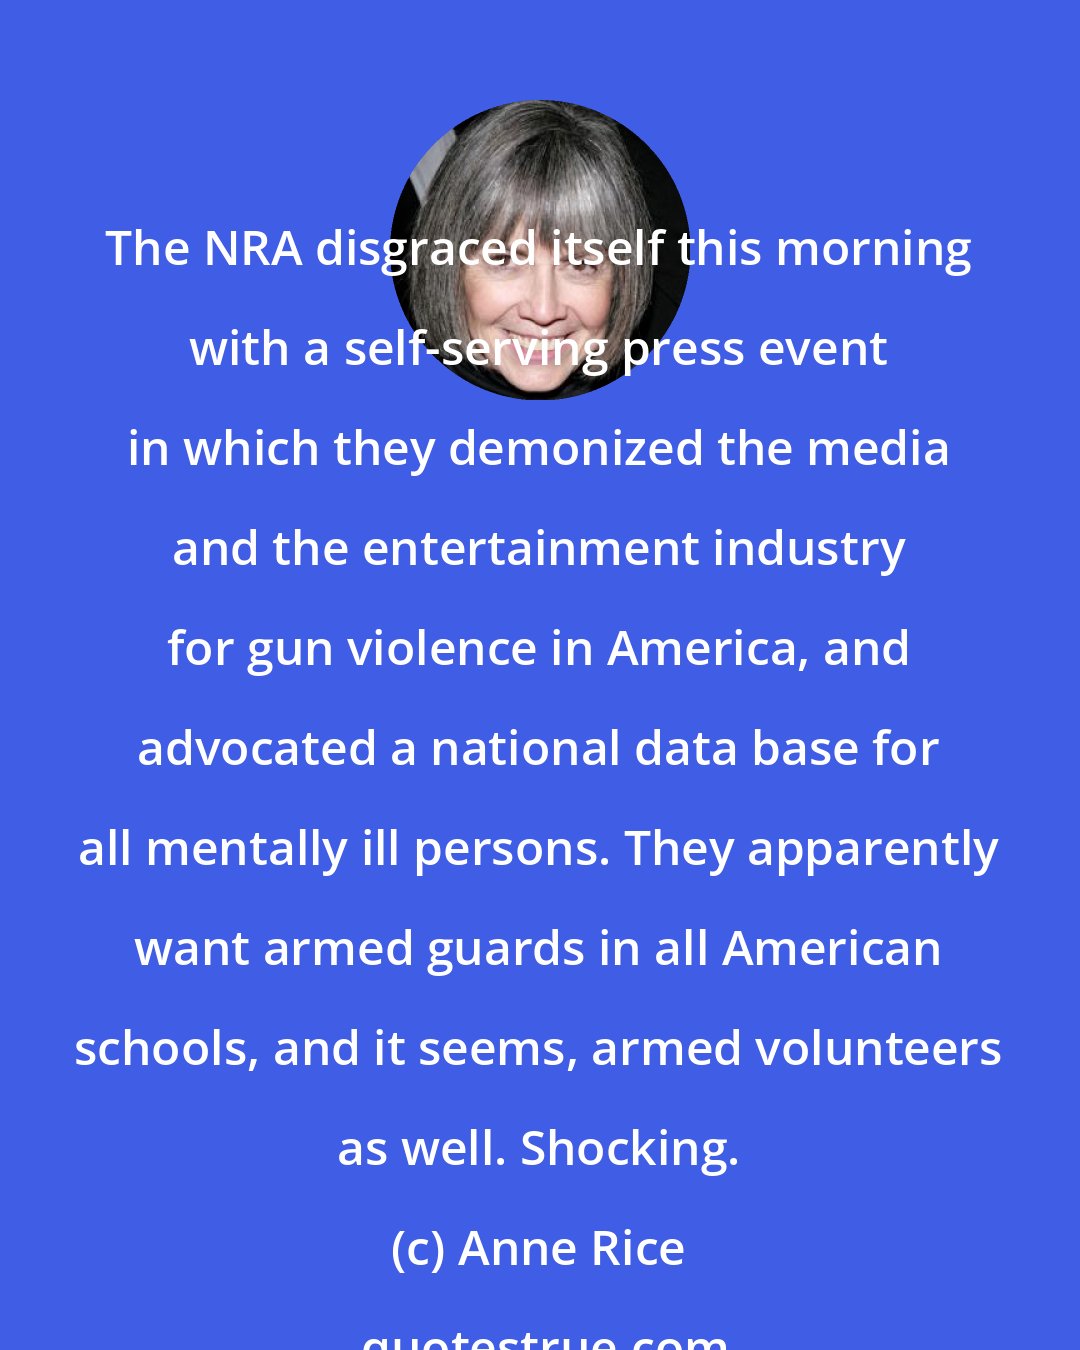 Anne Rice: The NRA disgraced itself this morning with a self-serving press event in which they demonized the media and the entertainment industry for gun violence in America, and advocated a national data base for all mentally ill persons. They apparently want armed guards in all American schools, and it seems, armed volunteers as well. Shocking.